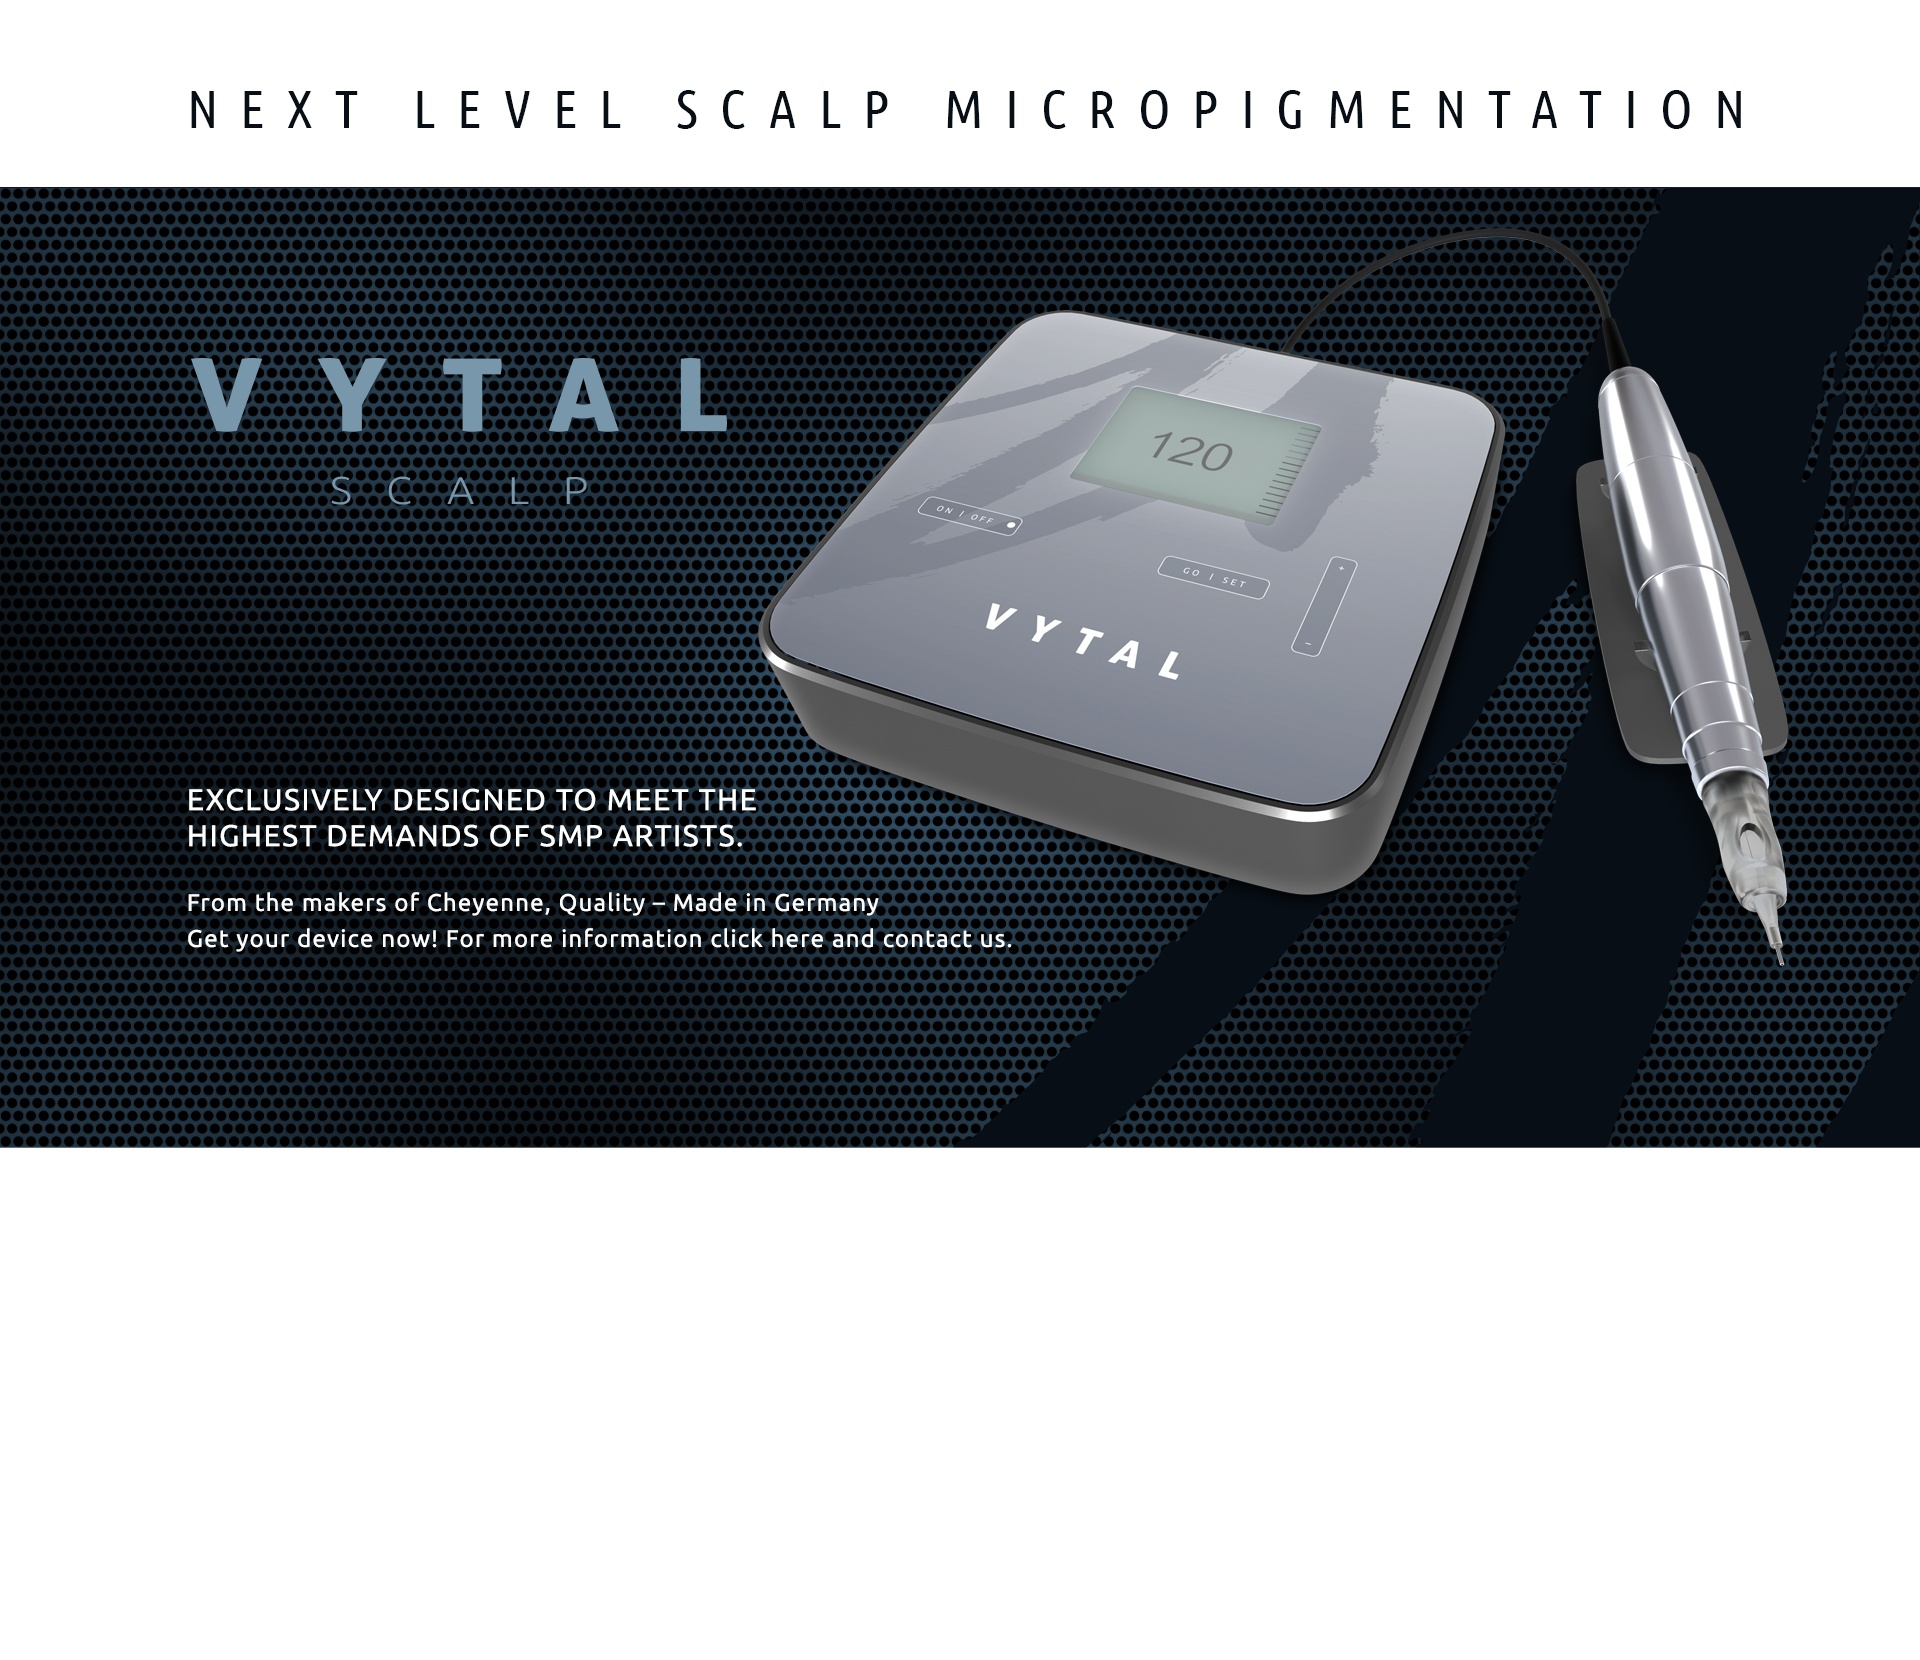 VYTAL Scalp - Next level scalp micropigmentation. Exclusively designed to meet the highest demands of SMP artists. From the makers of Cheyenne, Quality - Made in Germany. Get your device now!